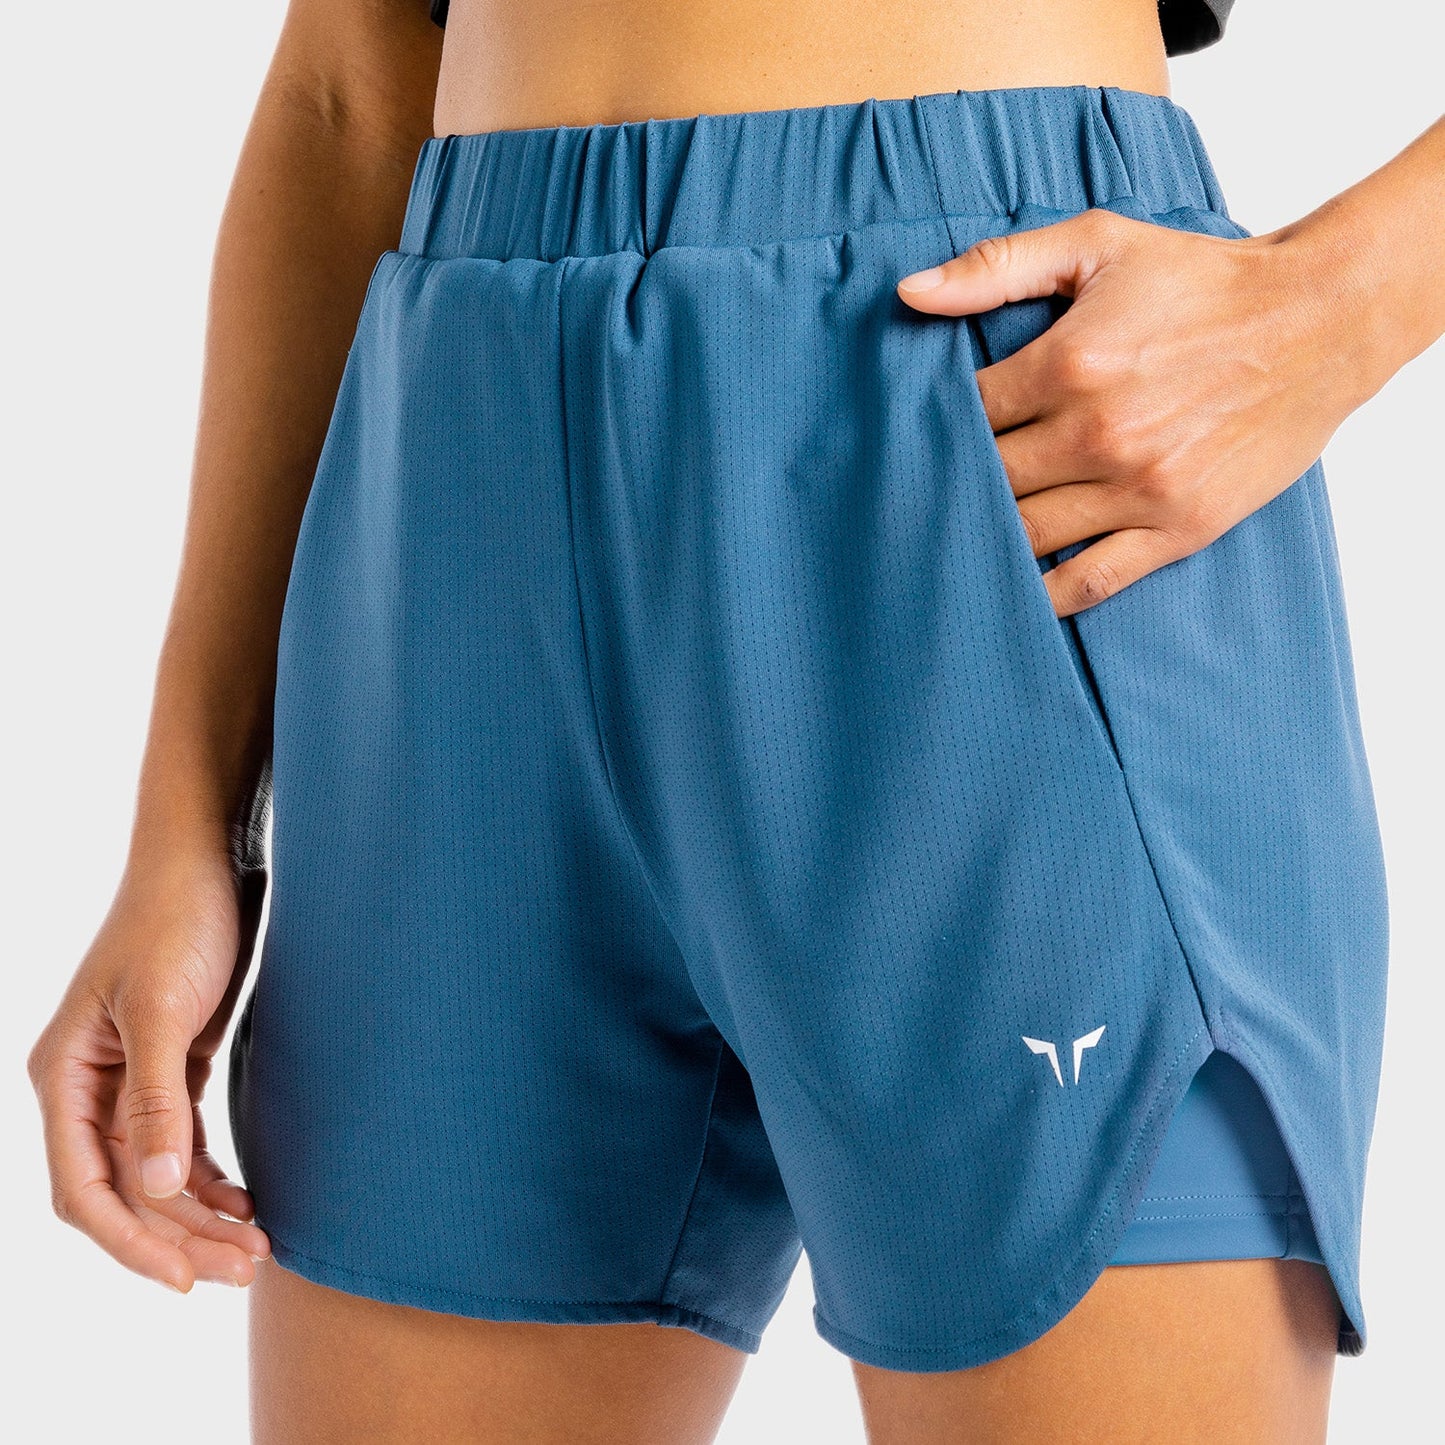 squatwolf-workout-clothes-core-2-in-1-shorts-blue-gym-shorts-for-women